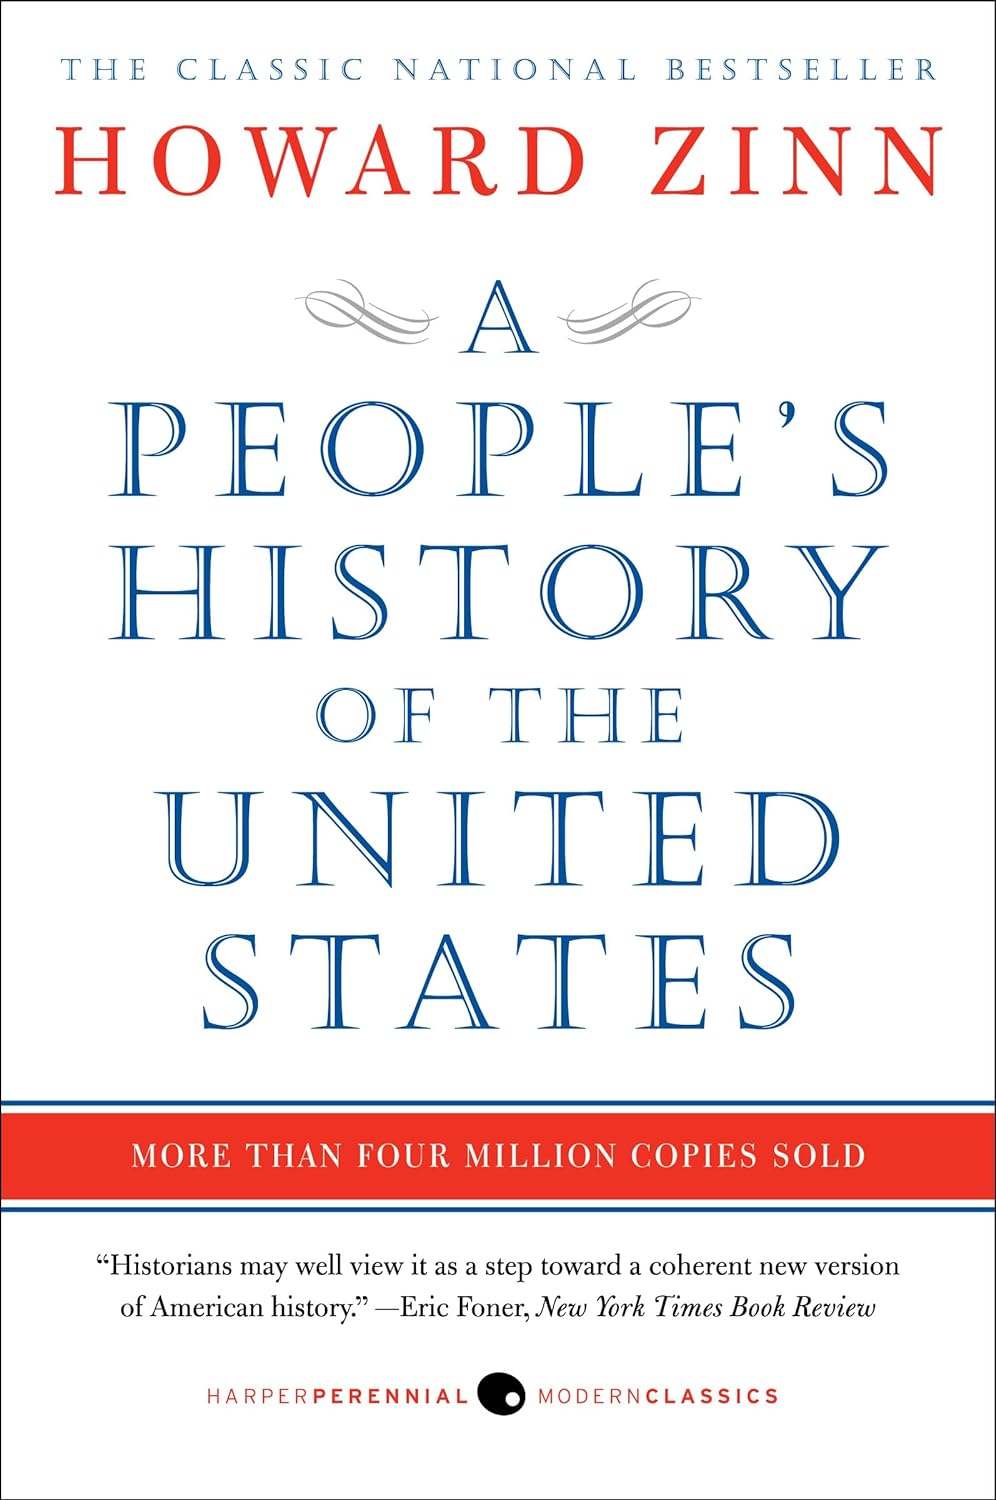 A People's History of the United States by Howard Zinn (1980)